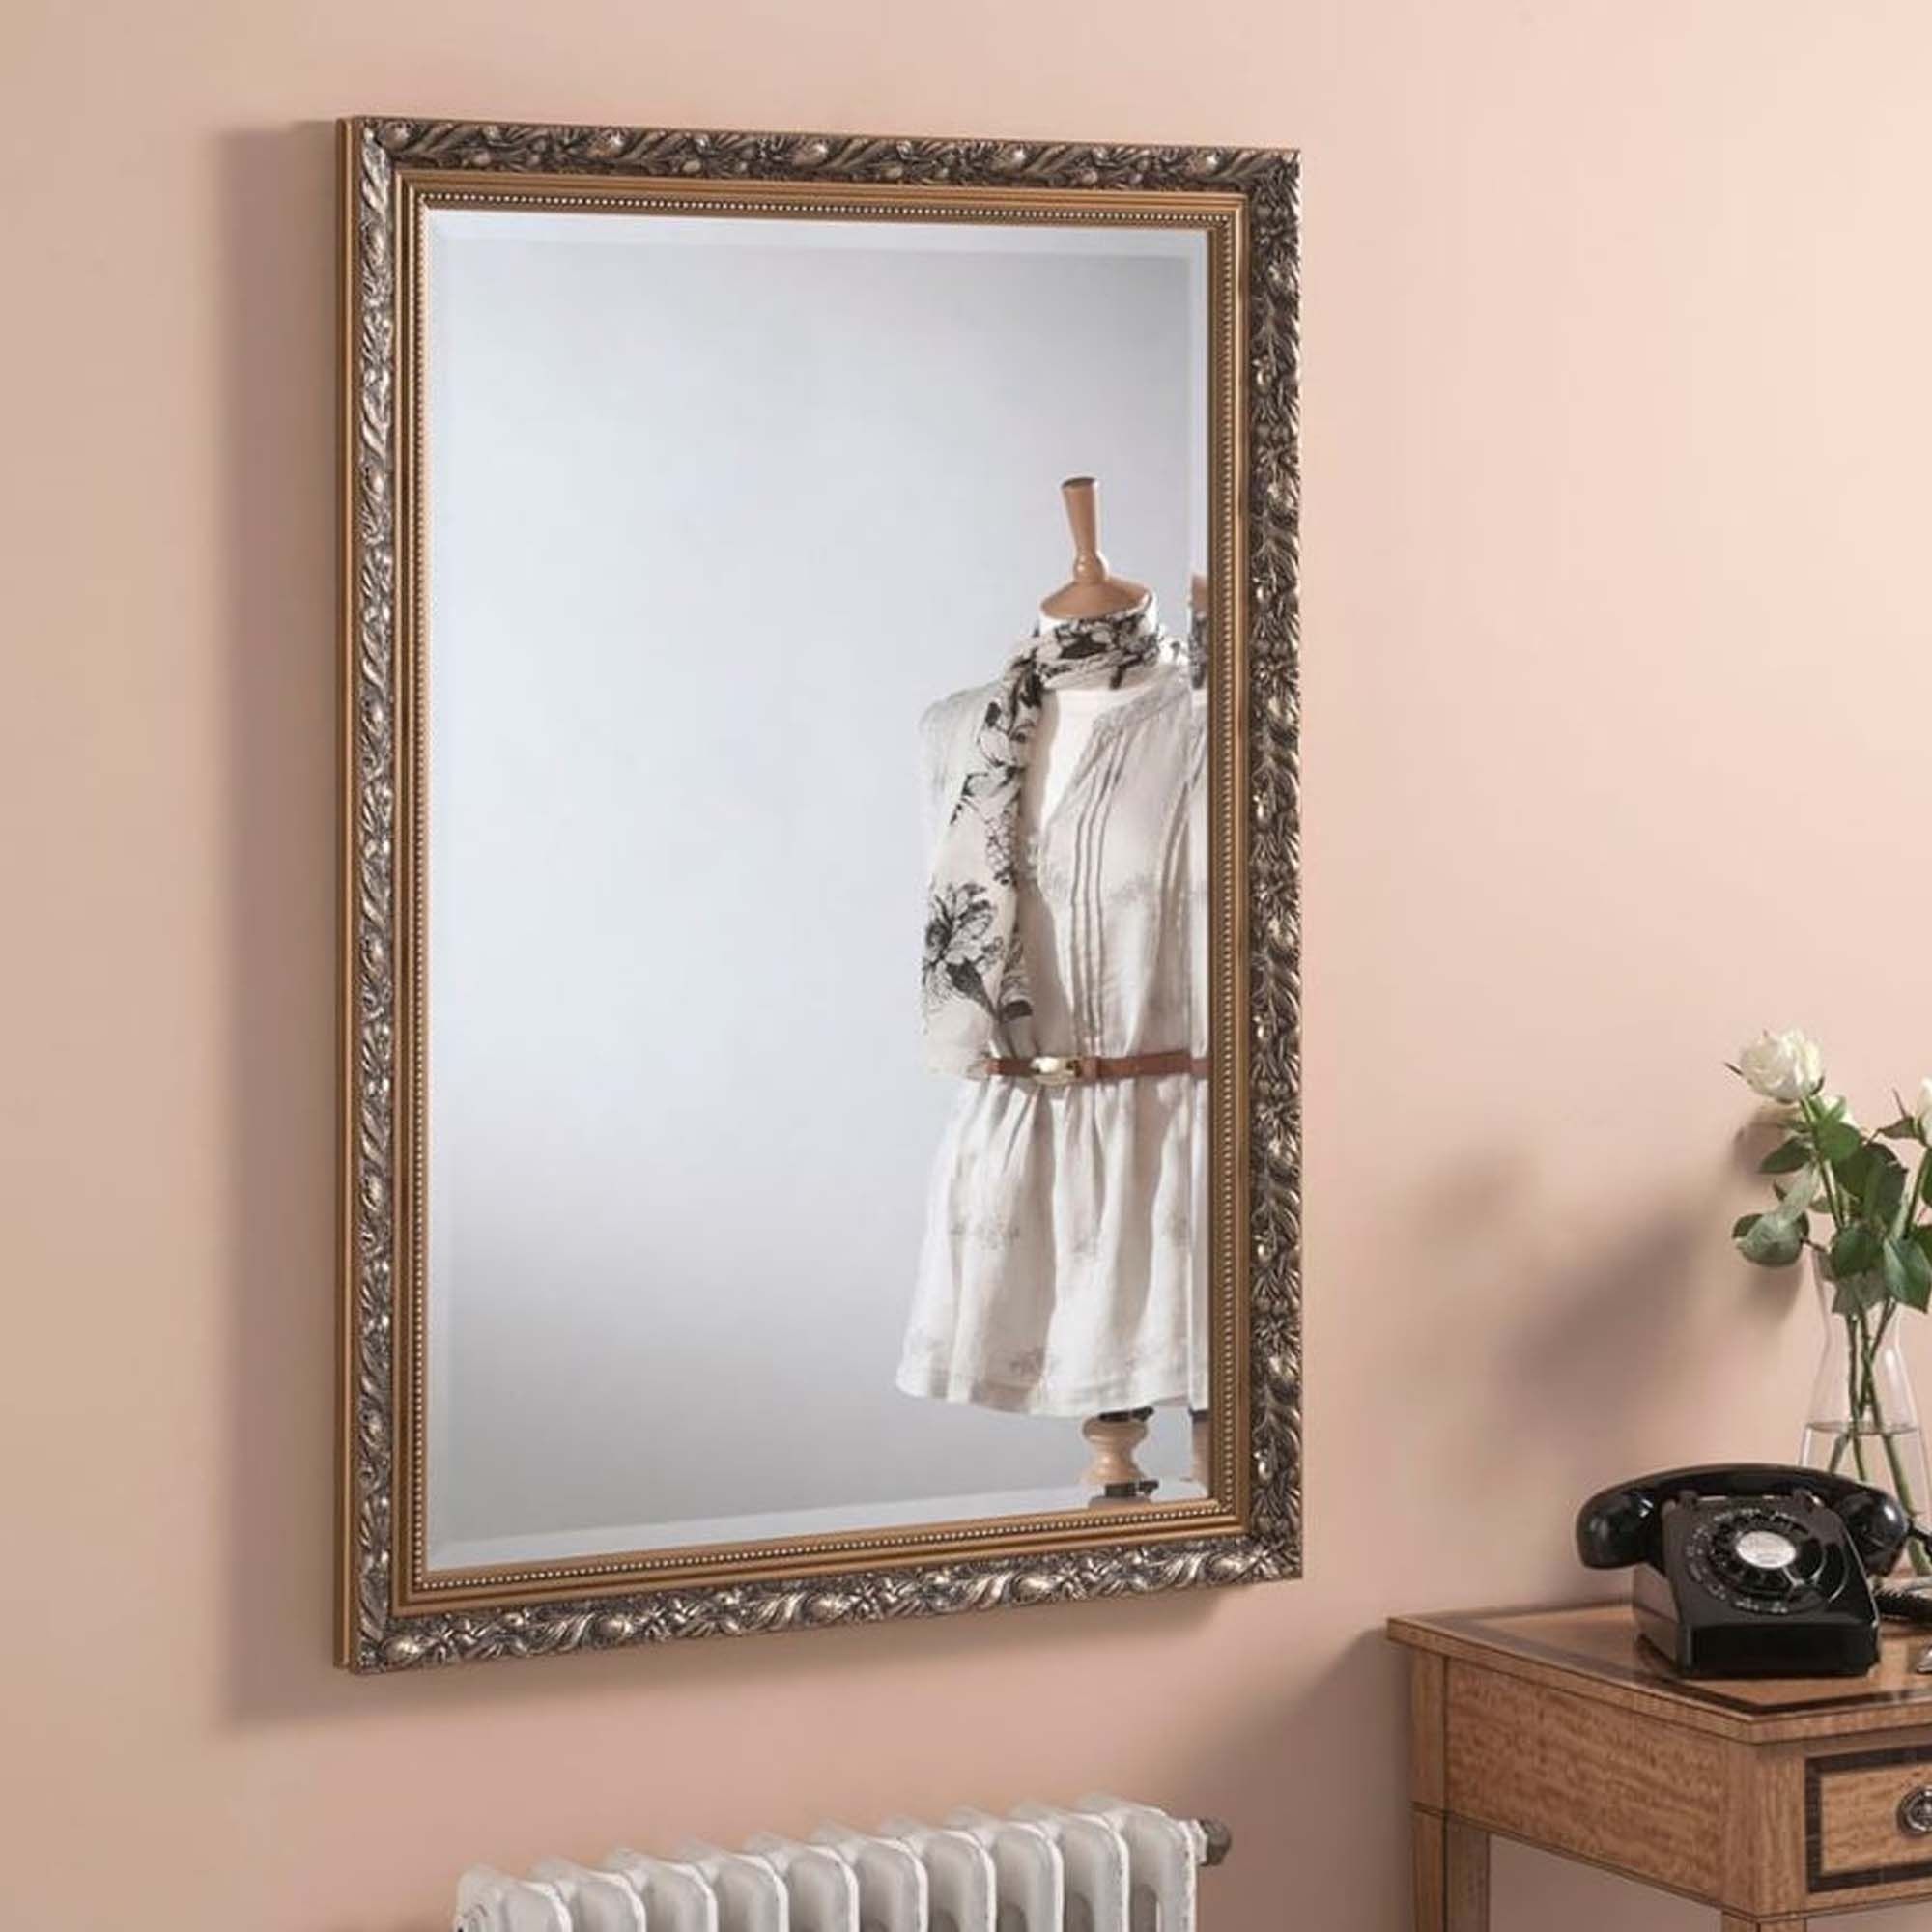 Dahlia Decorative Gold Rectangular Wall Mirror | Homesdirect365 Inside Tellier Accent Wall Mirrors (View 11 of 15)